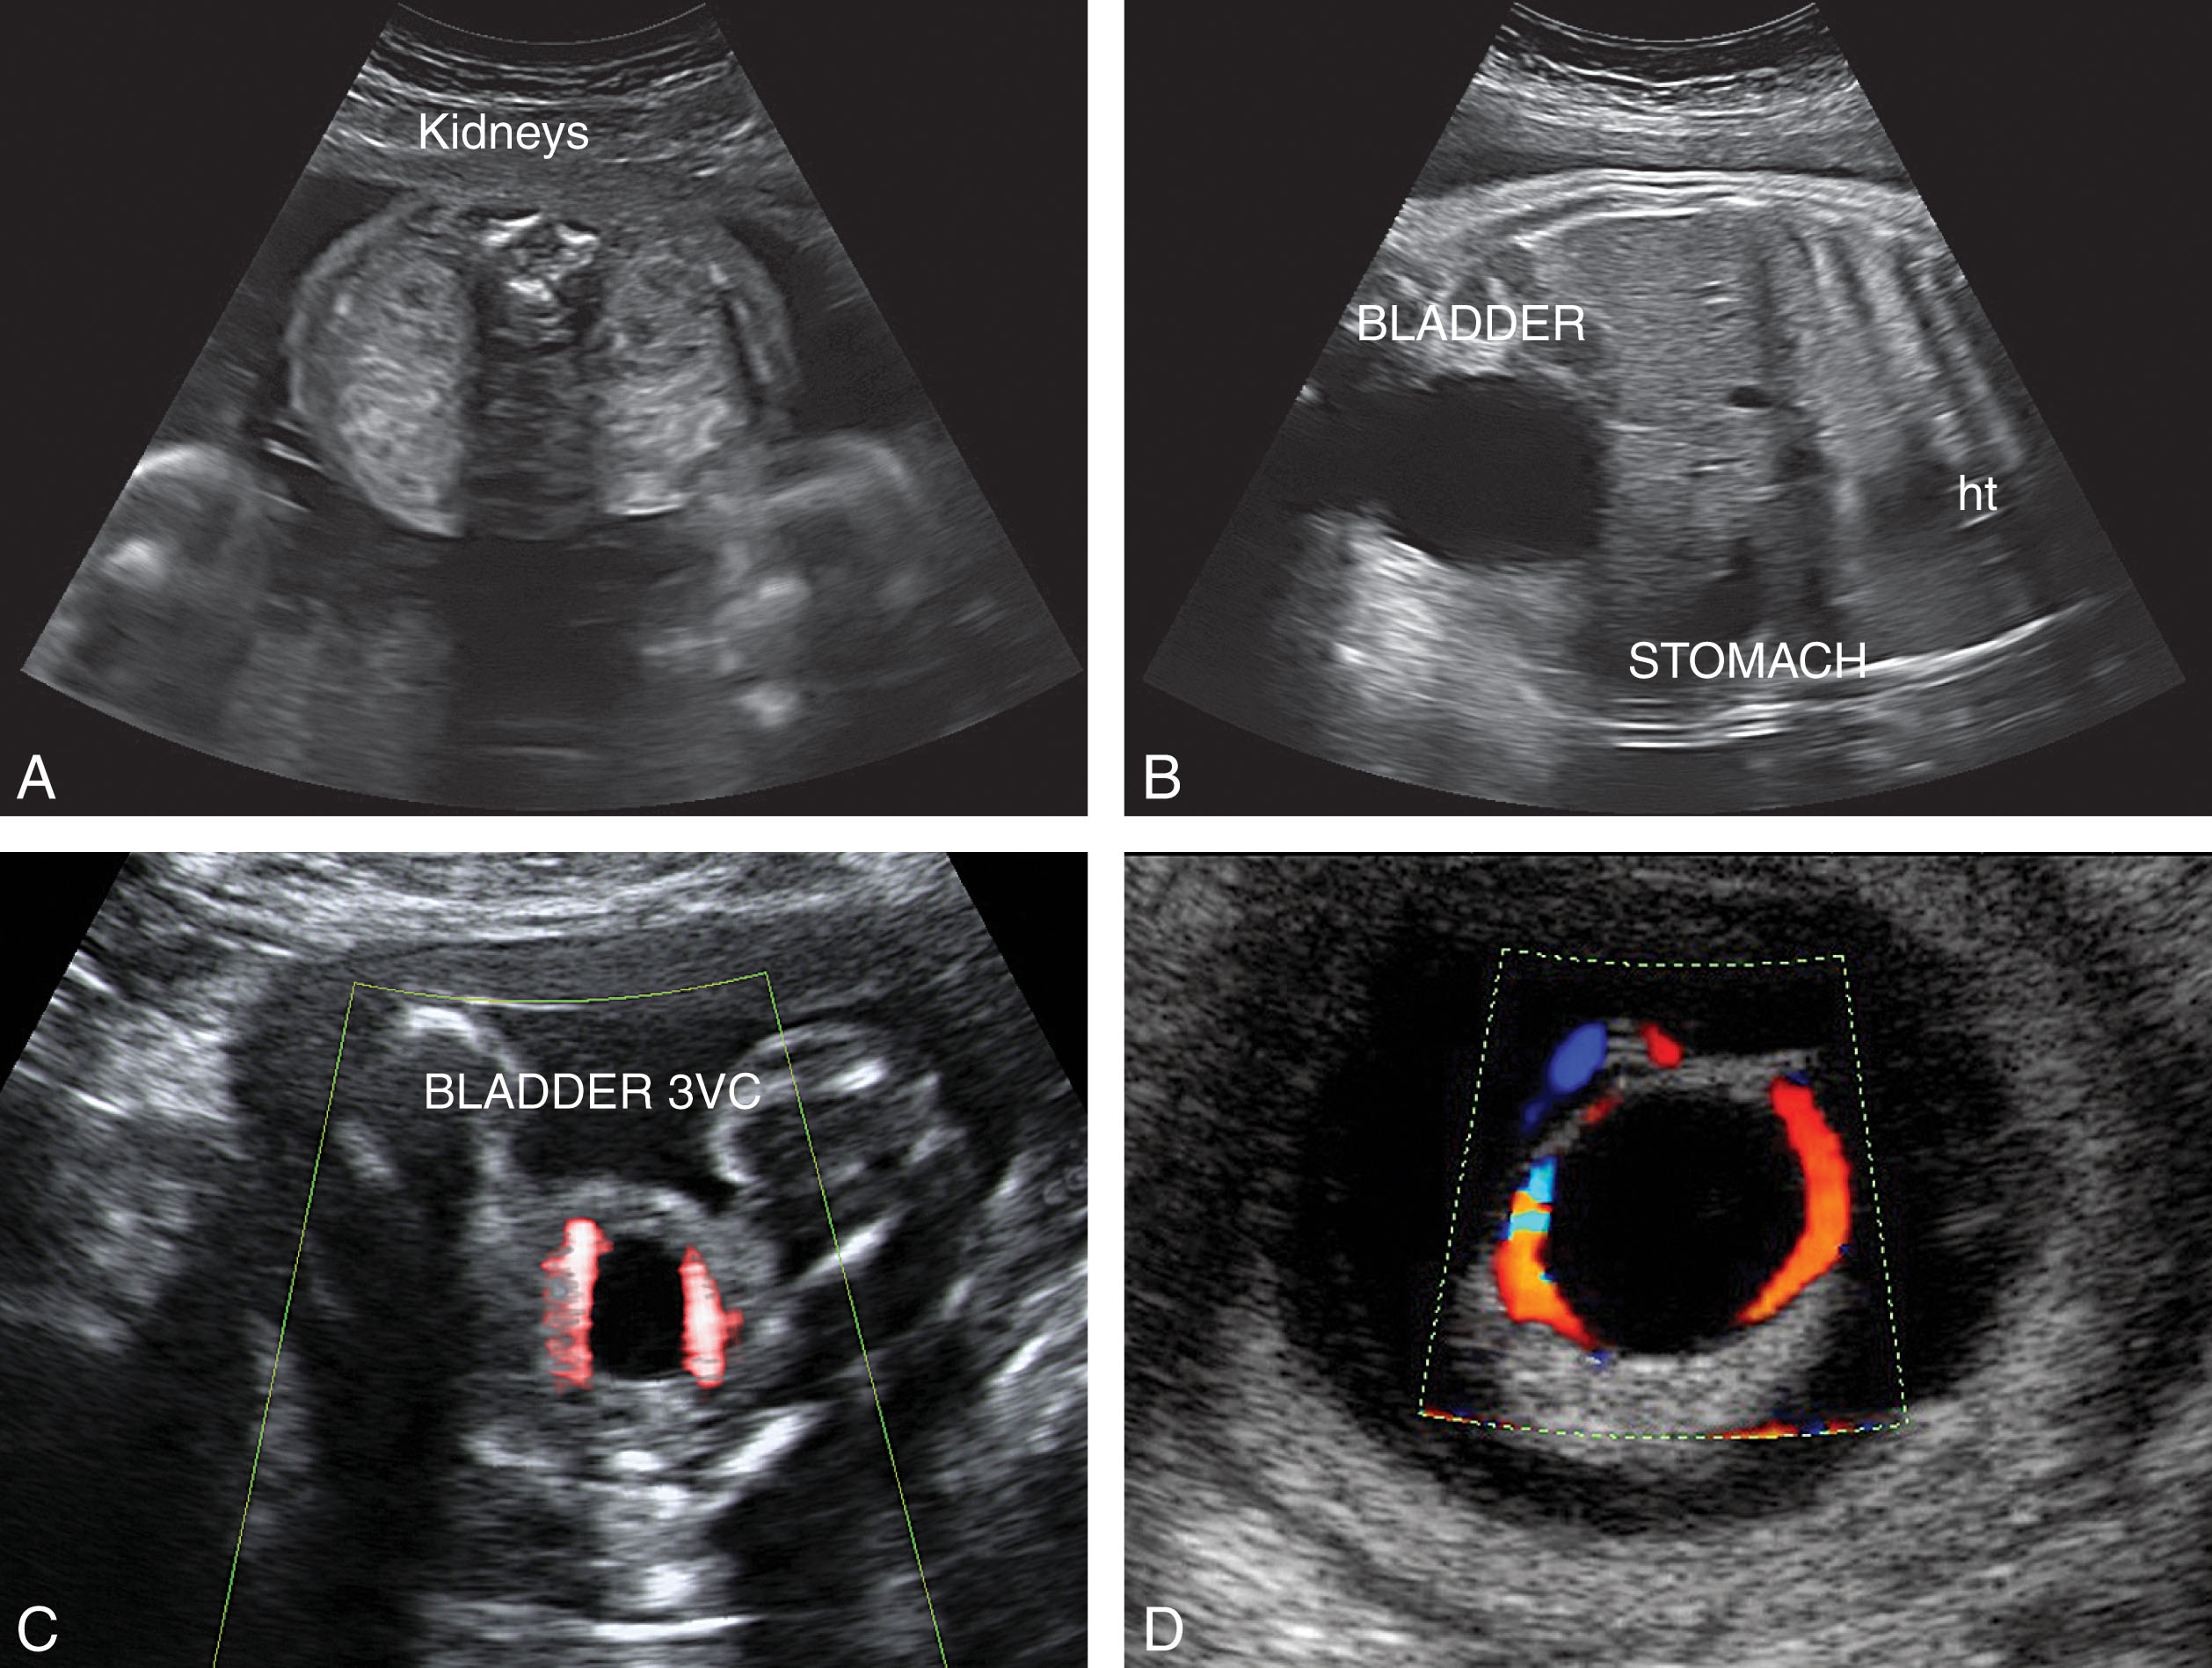 Fig. 64.7, (A) Normal kidneys in the transverse view located on either side of the fetal spine. The anterior position of the spine provides optimal resolution for evaluating the kidneys. (B) The anechoic bladder is noted caudal in the fetal body as it relates the anechoic fetal stomach. (C) The bladder is noted lying between, low within the pelvis. Color Doppler reveals arterial blood flow on each side of the bladder, supporting the findings of a three-vessel cord (3VC). (D) An obstructed fetal bladder is noted in an early second-trimester fetus. Color Doppler reveals the presence of a three-vessel cord. ht , Heart.